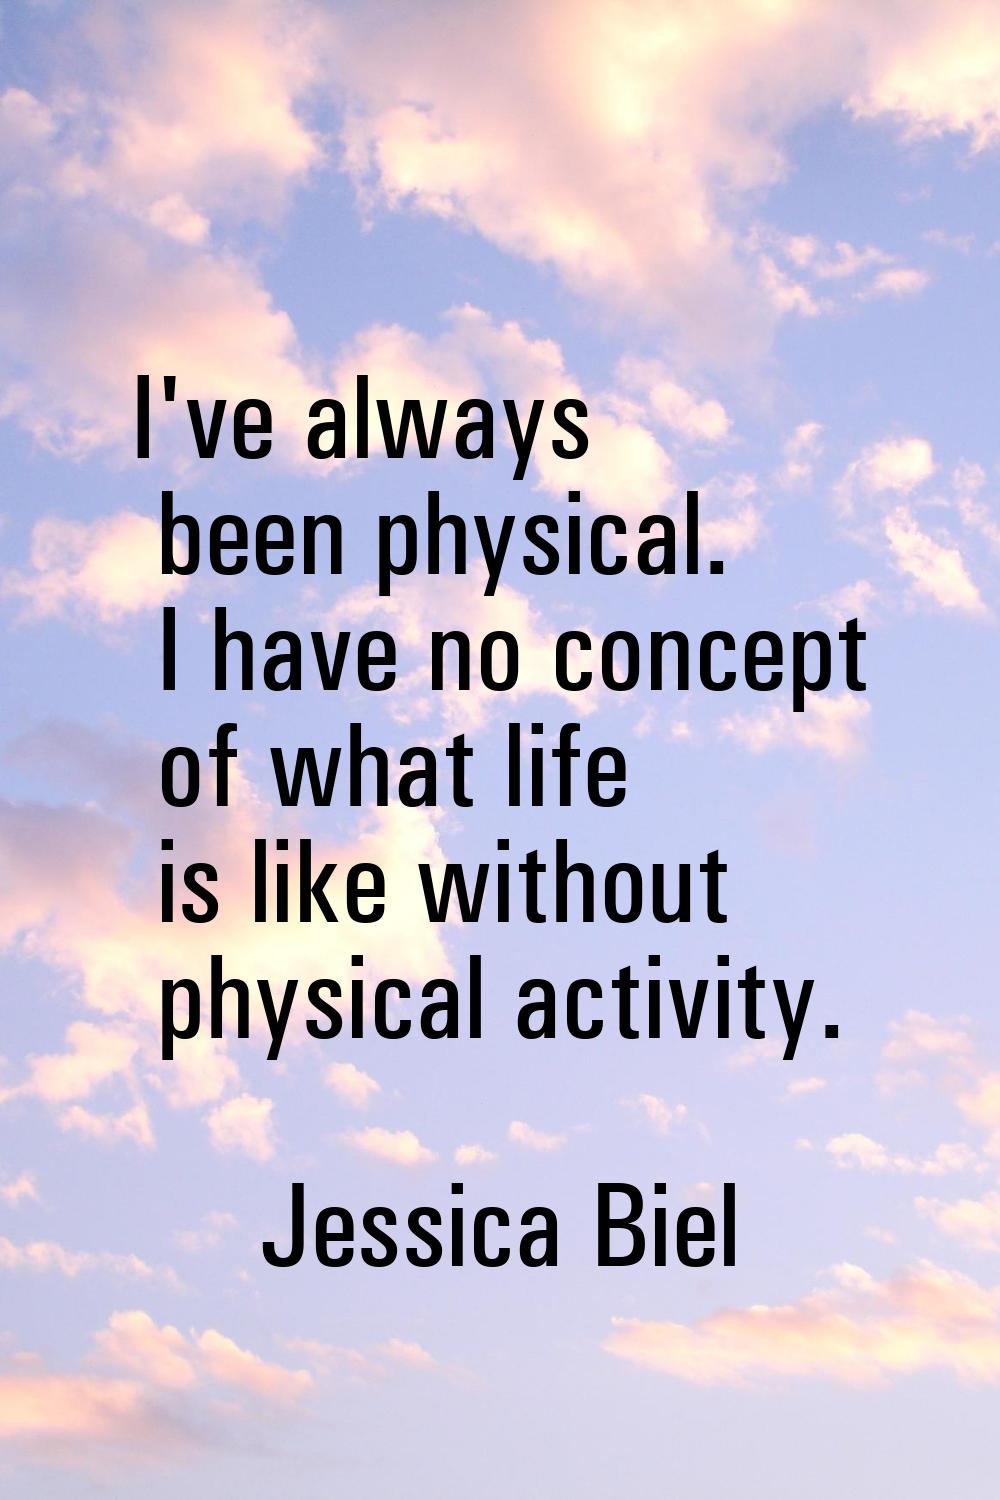 I've always been physical. I have no concept of what life is like without physical activity.